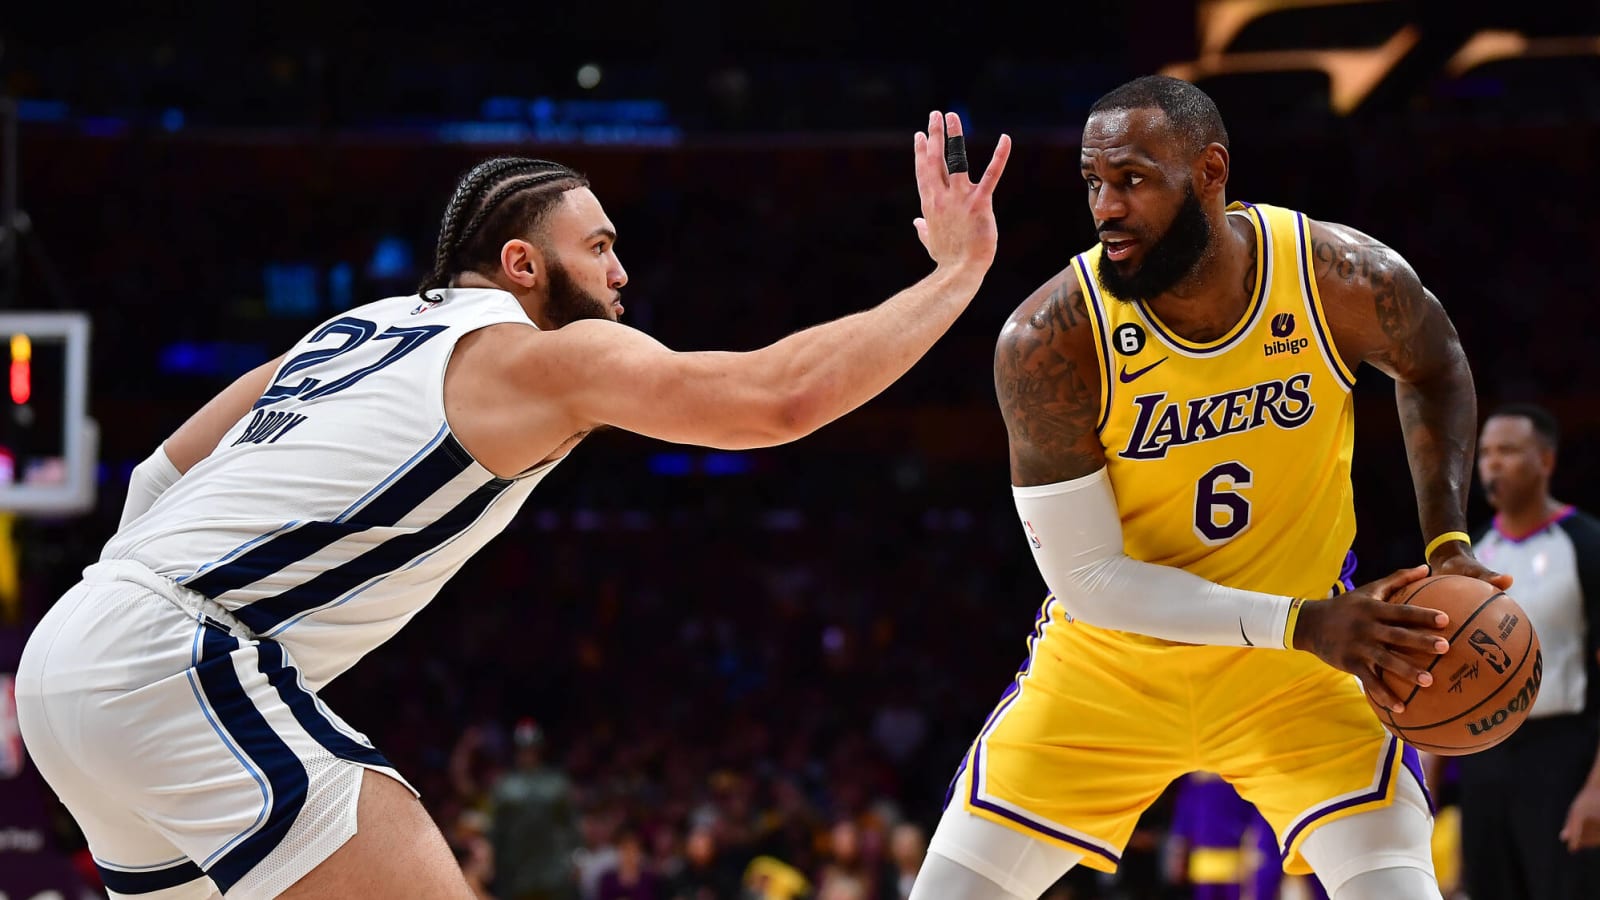 LeBron James&#39; 22-20 night leads Lakers over Grizzlies in OT